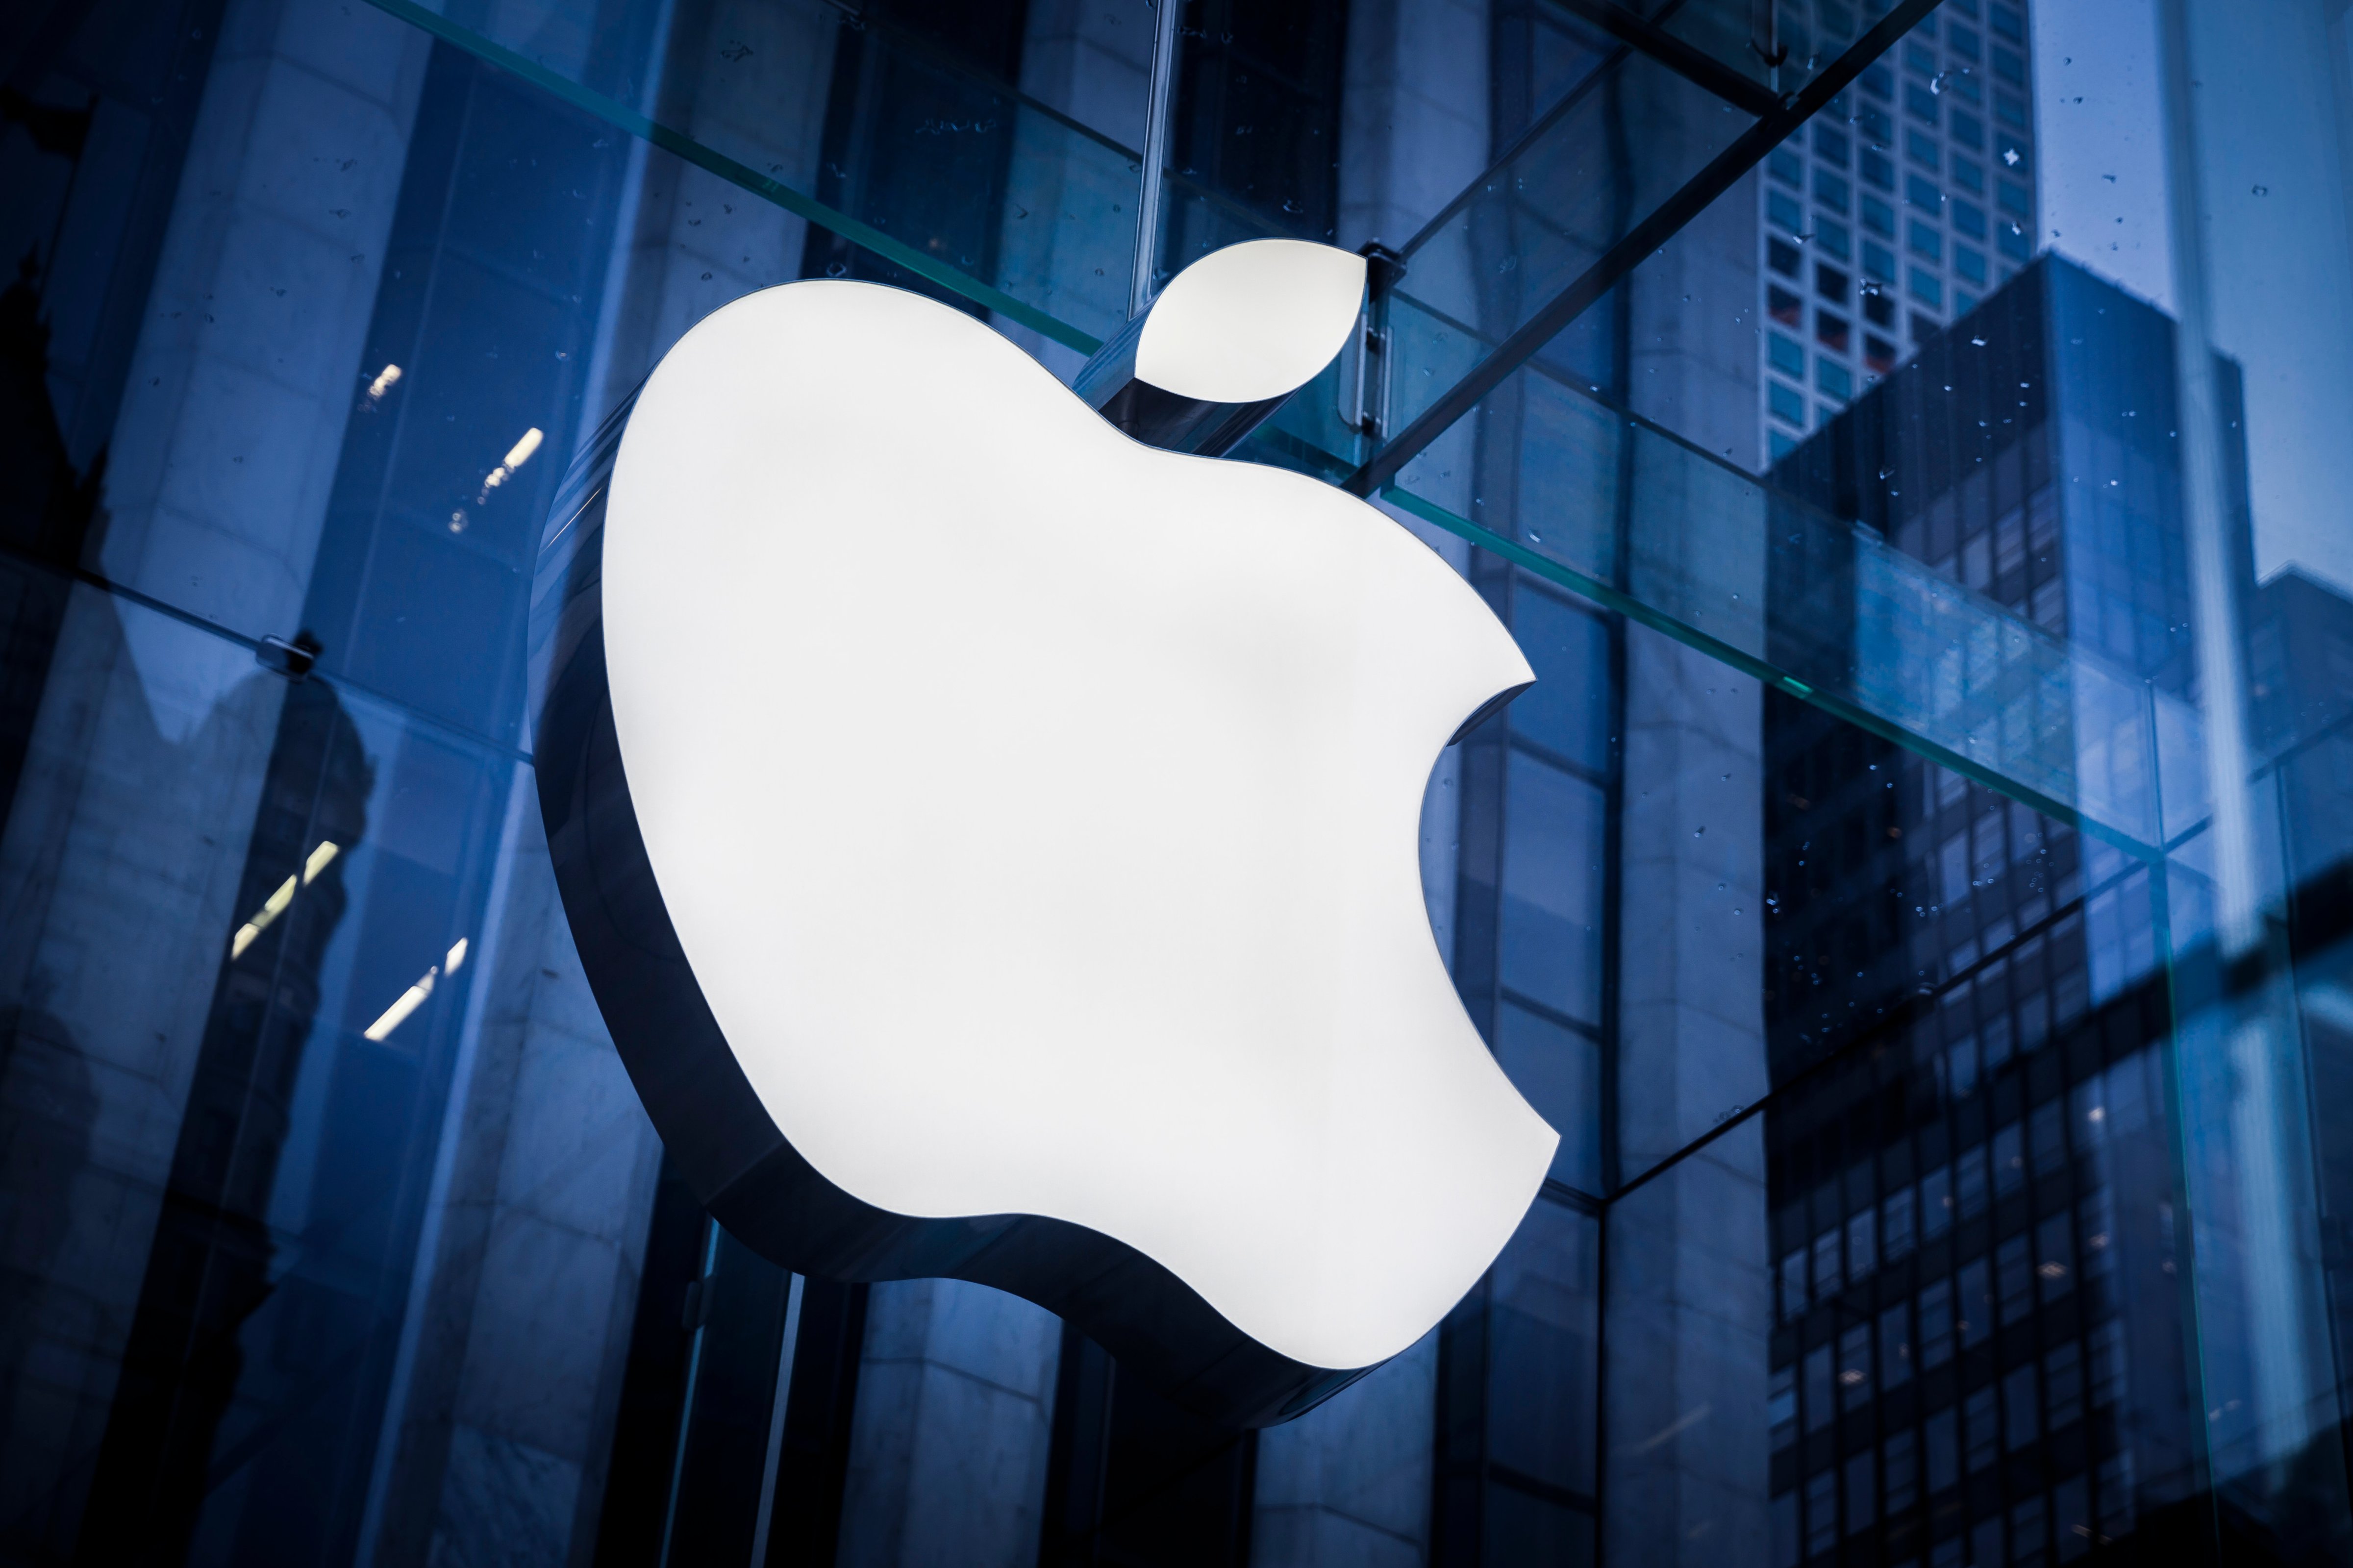 Apple's logo is seen at a  store in Manhattan on February 25, 2016 in New York, United States of America. (Thomas Trutschel&mdash;Photothek/Getty Images)